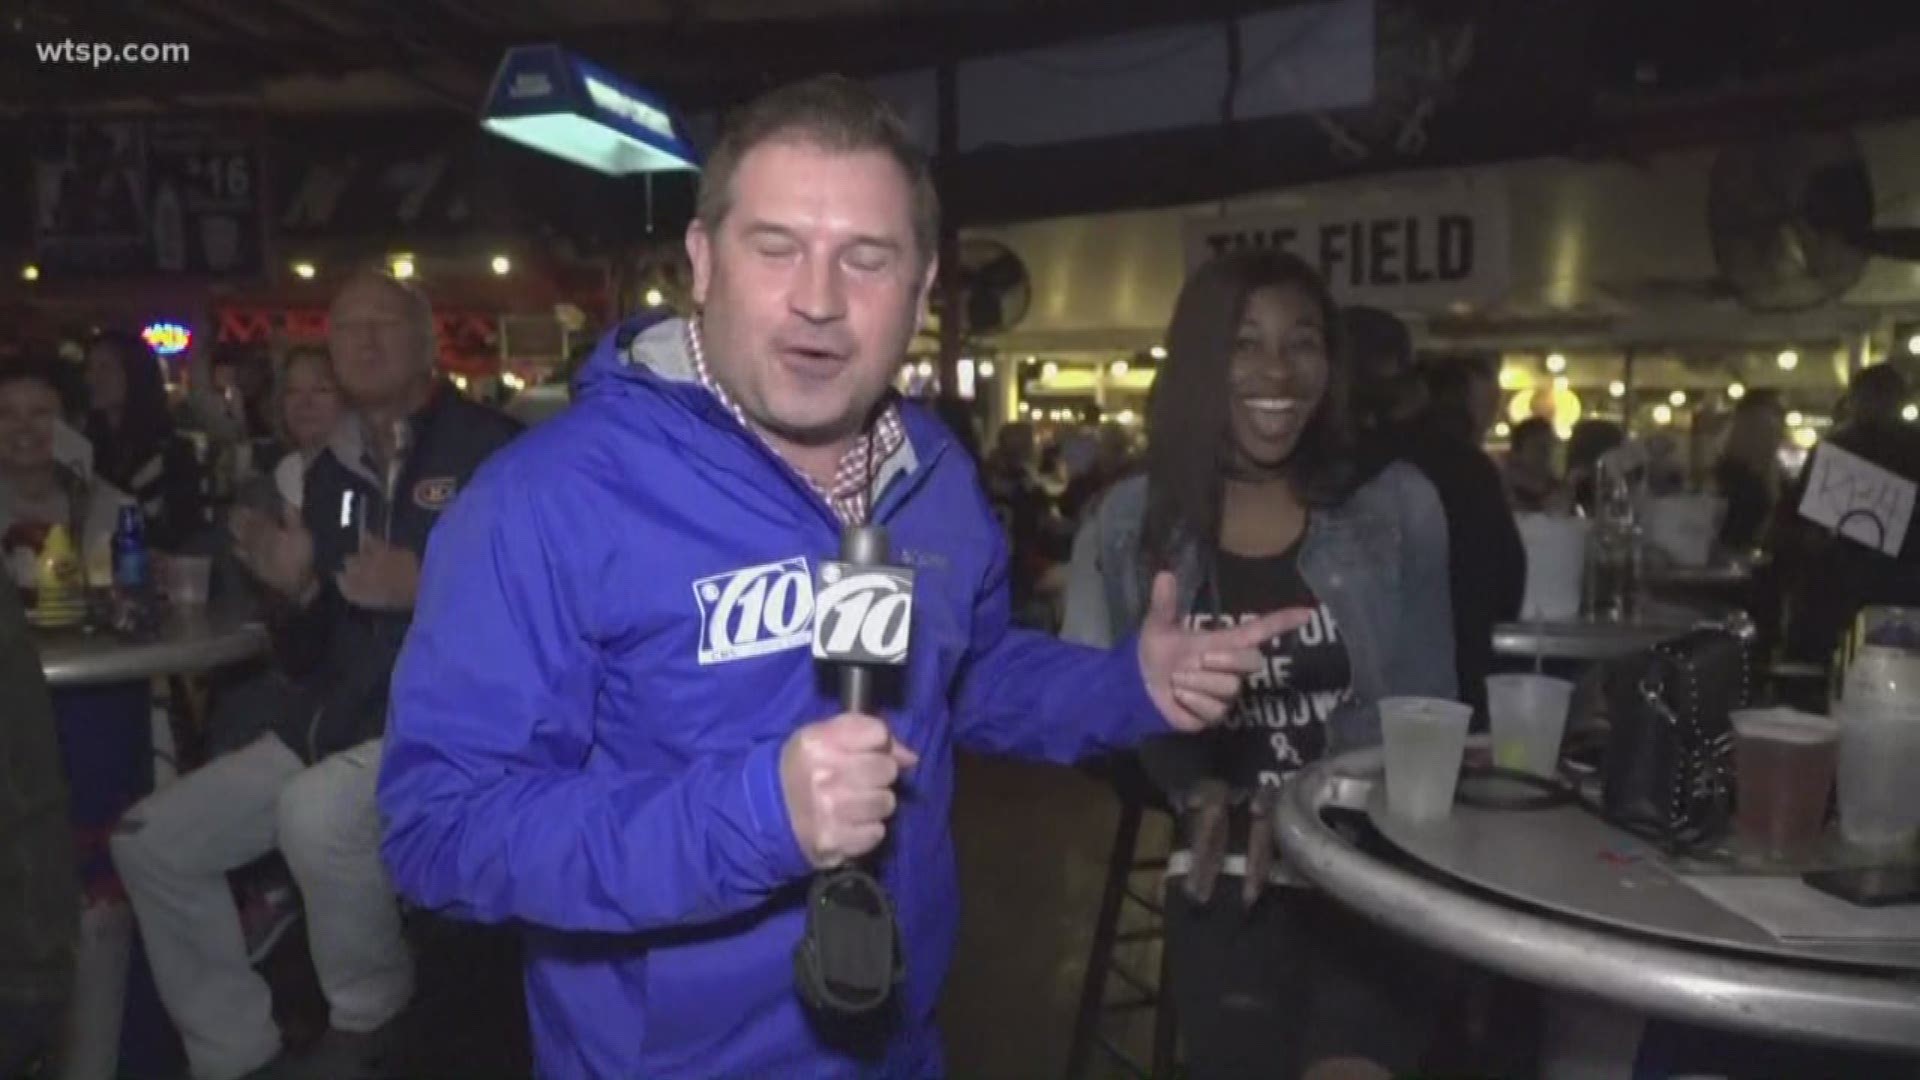 10News is at Ferg's enjoying Super Bowl 54 with fans.